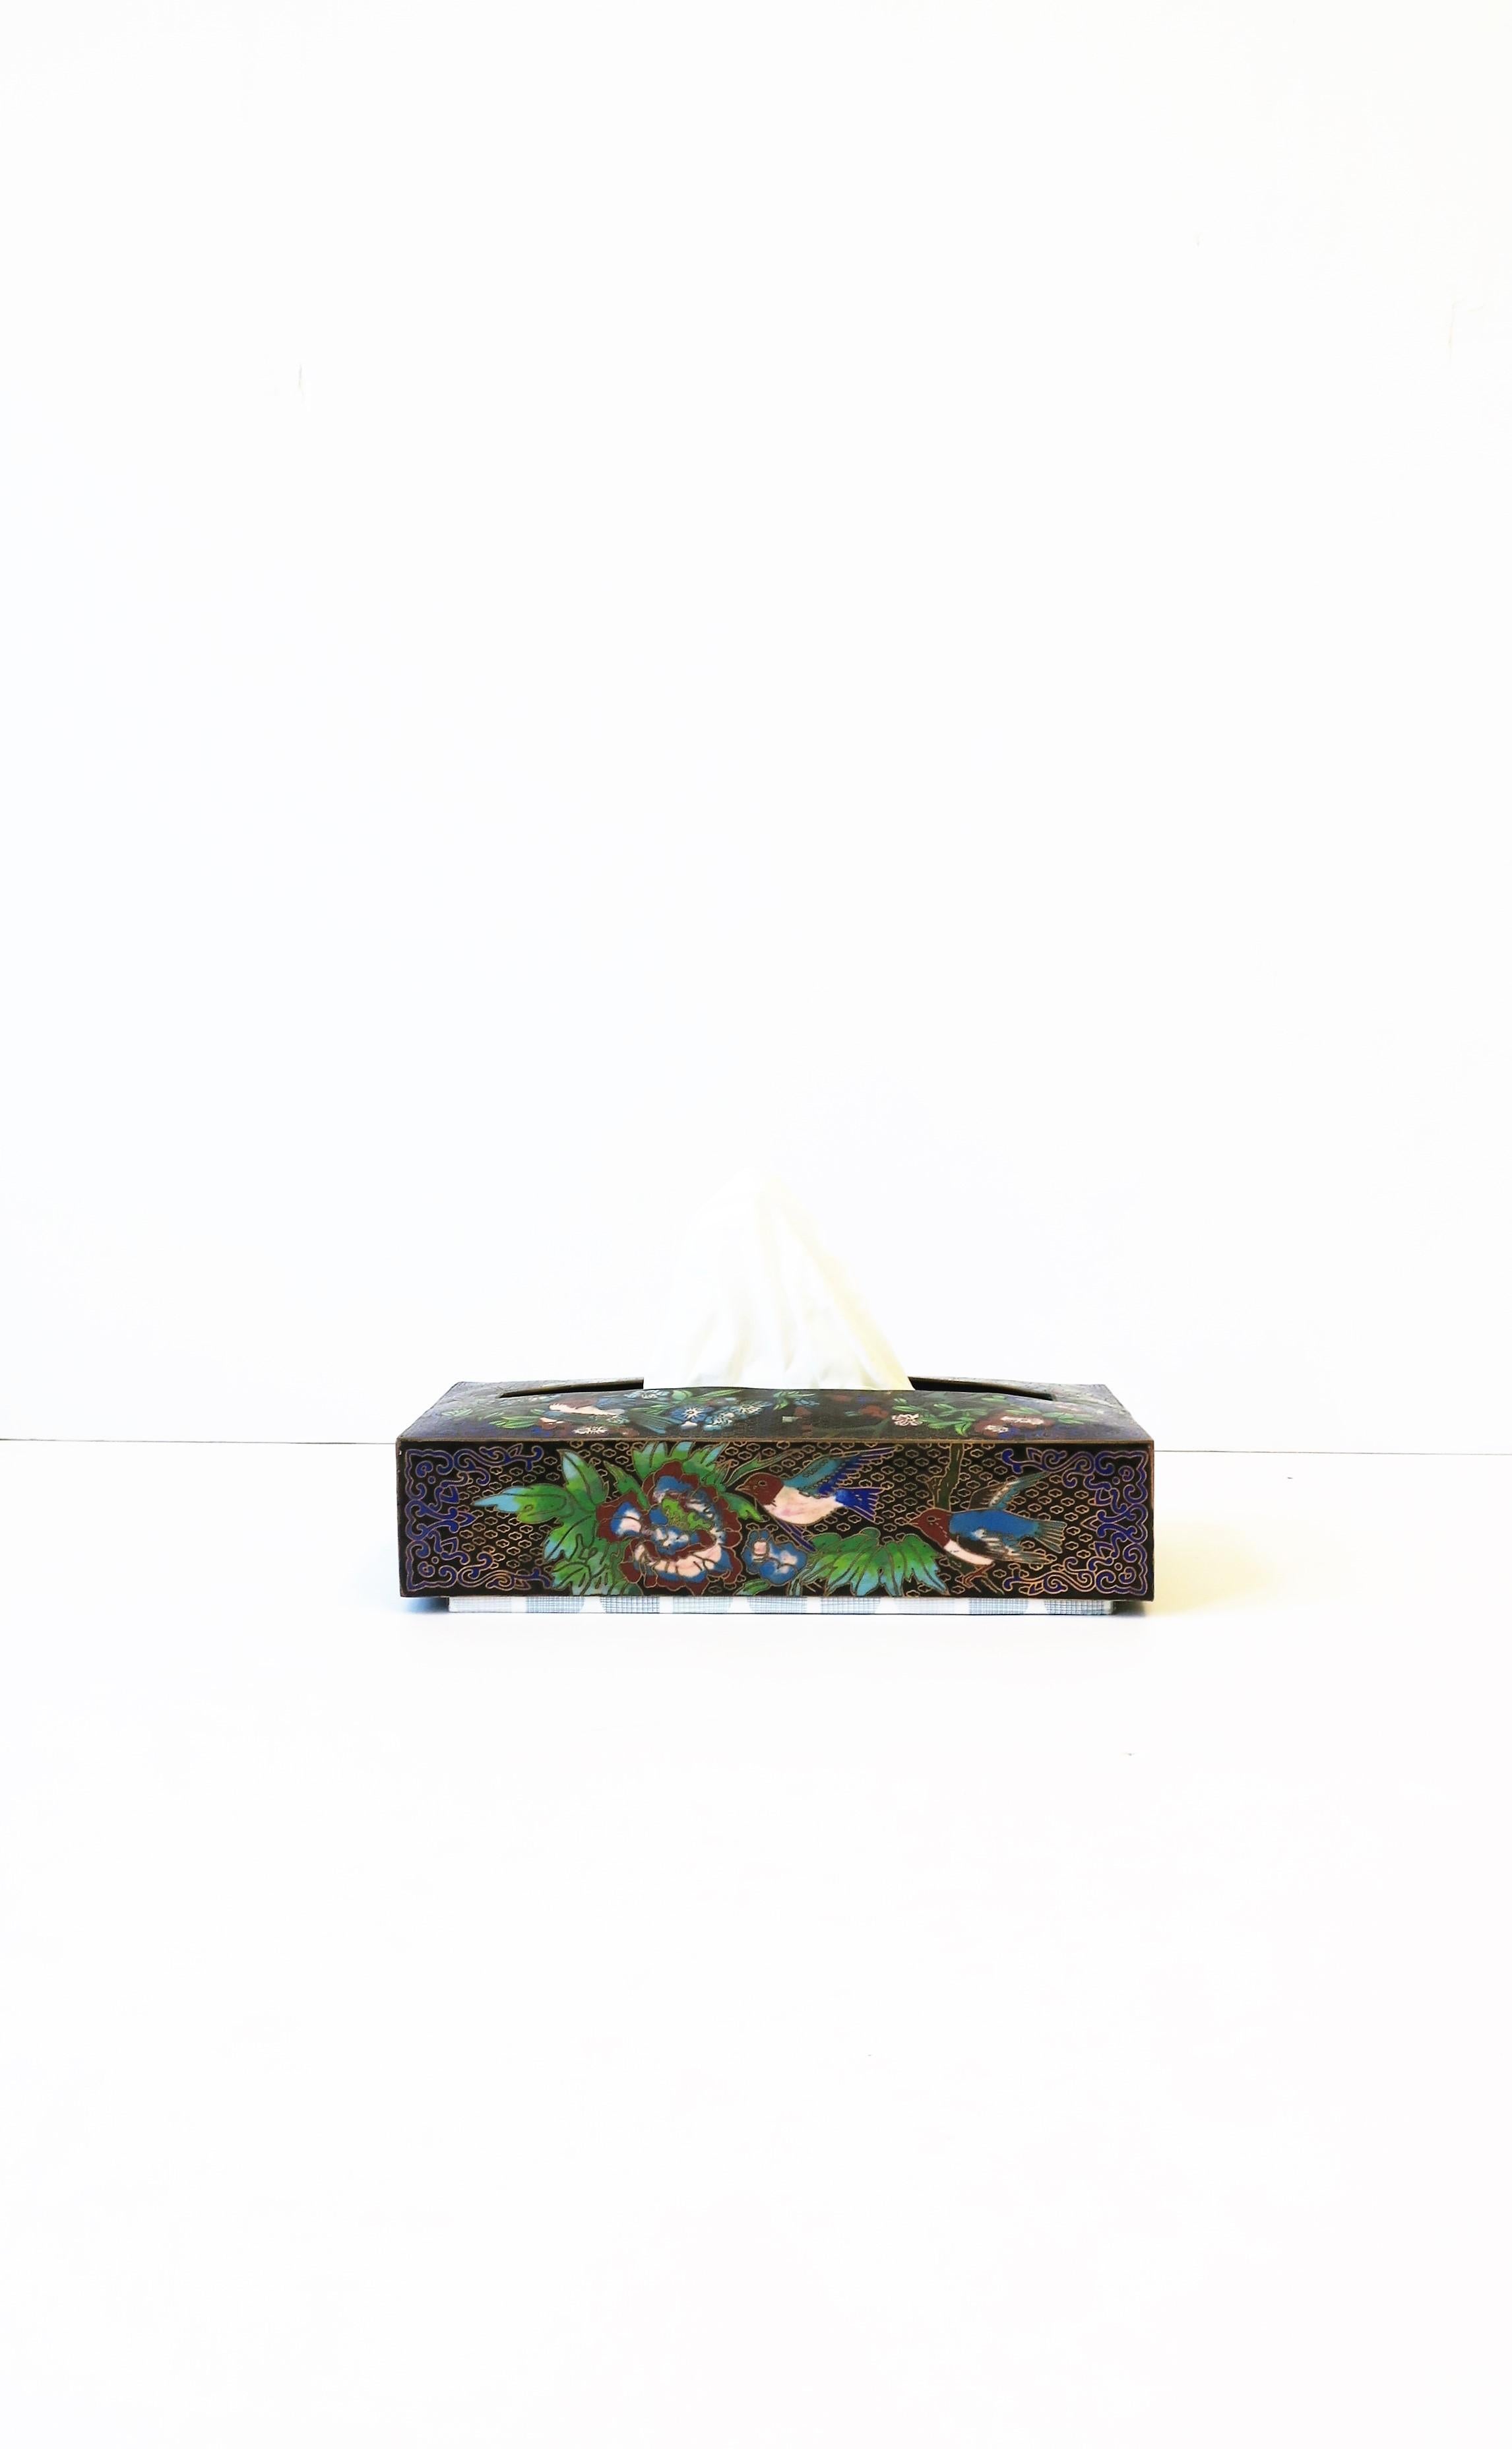 Brass and Cloisonné Enamel Tissue Box Holder Cover with Birds and Flowers 7